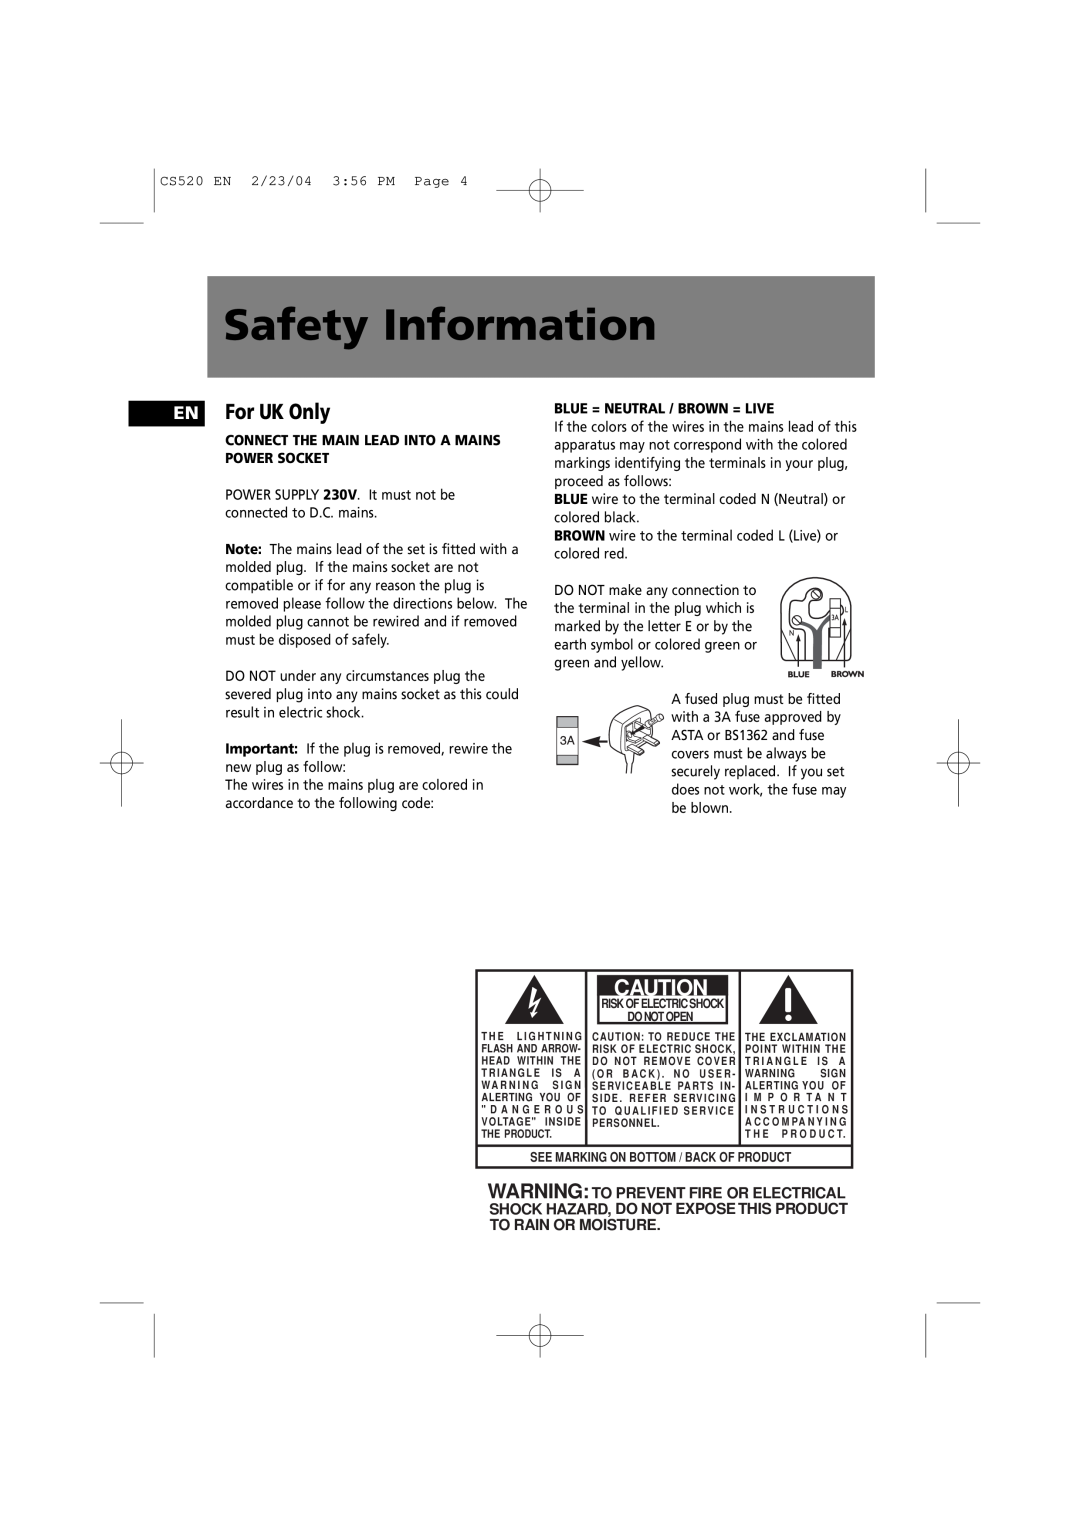 Technicolor - Thomson CS520 manual Safety Information, EN For UK Only 